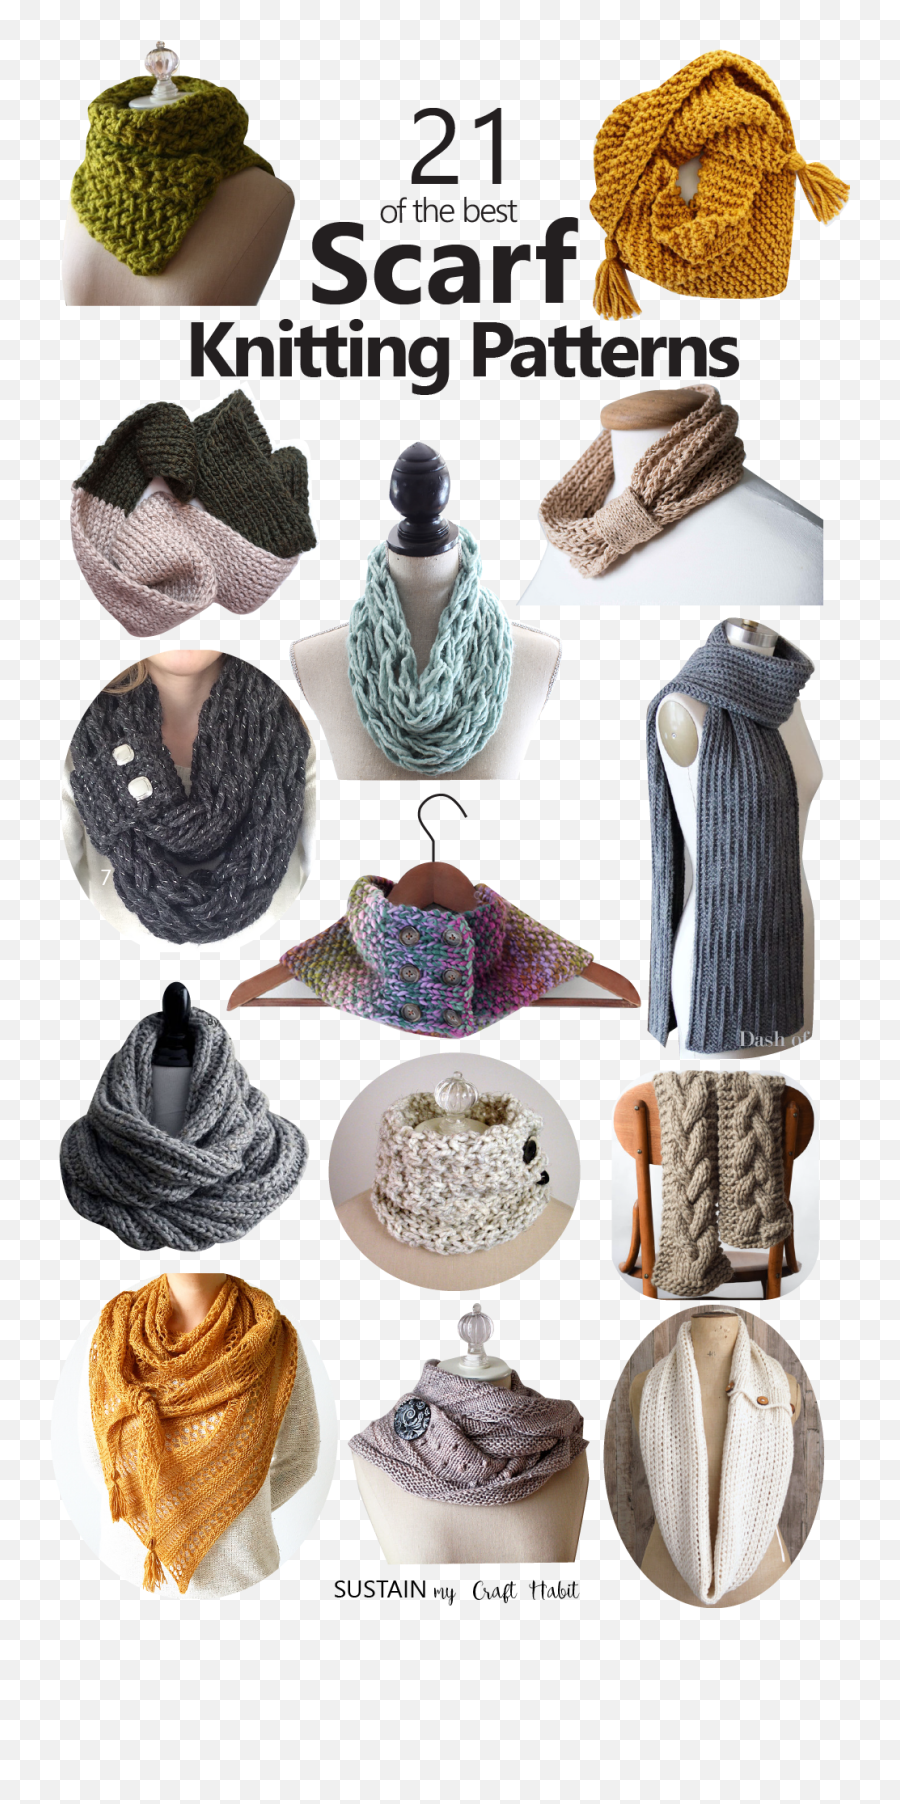 21 Of The Best Scarf Knitting Patterns - Different Styles Of Knitted Scarf Emoji,Knit Your Emotions Journal Shawl